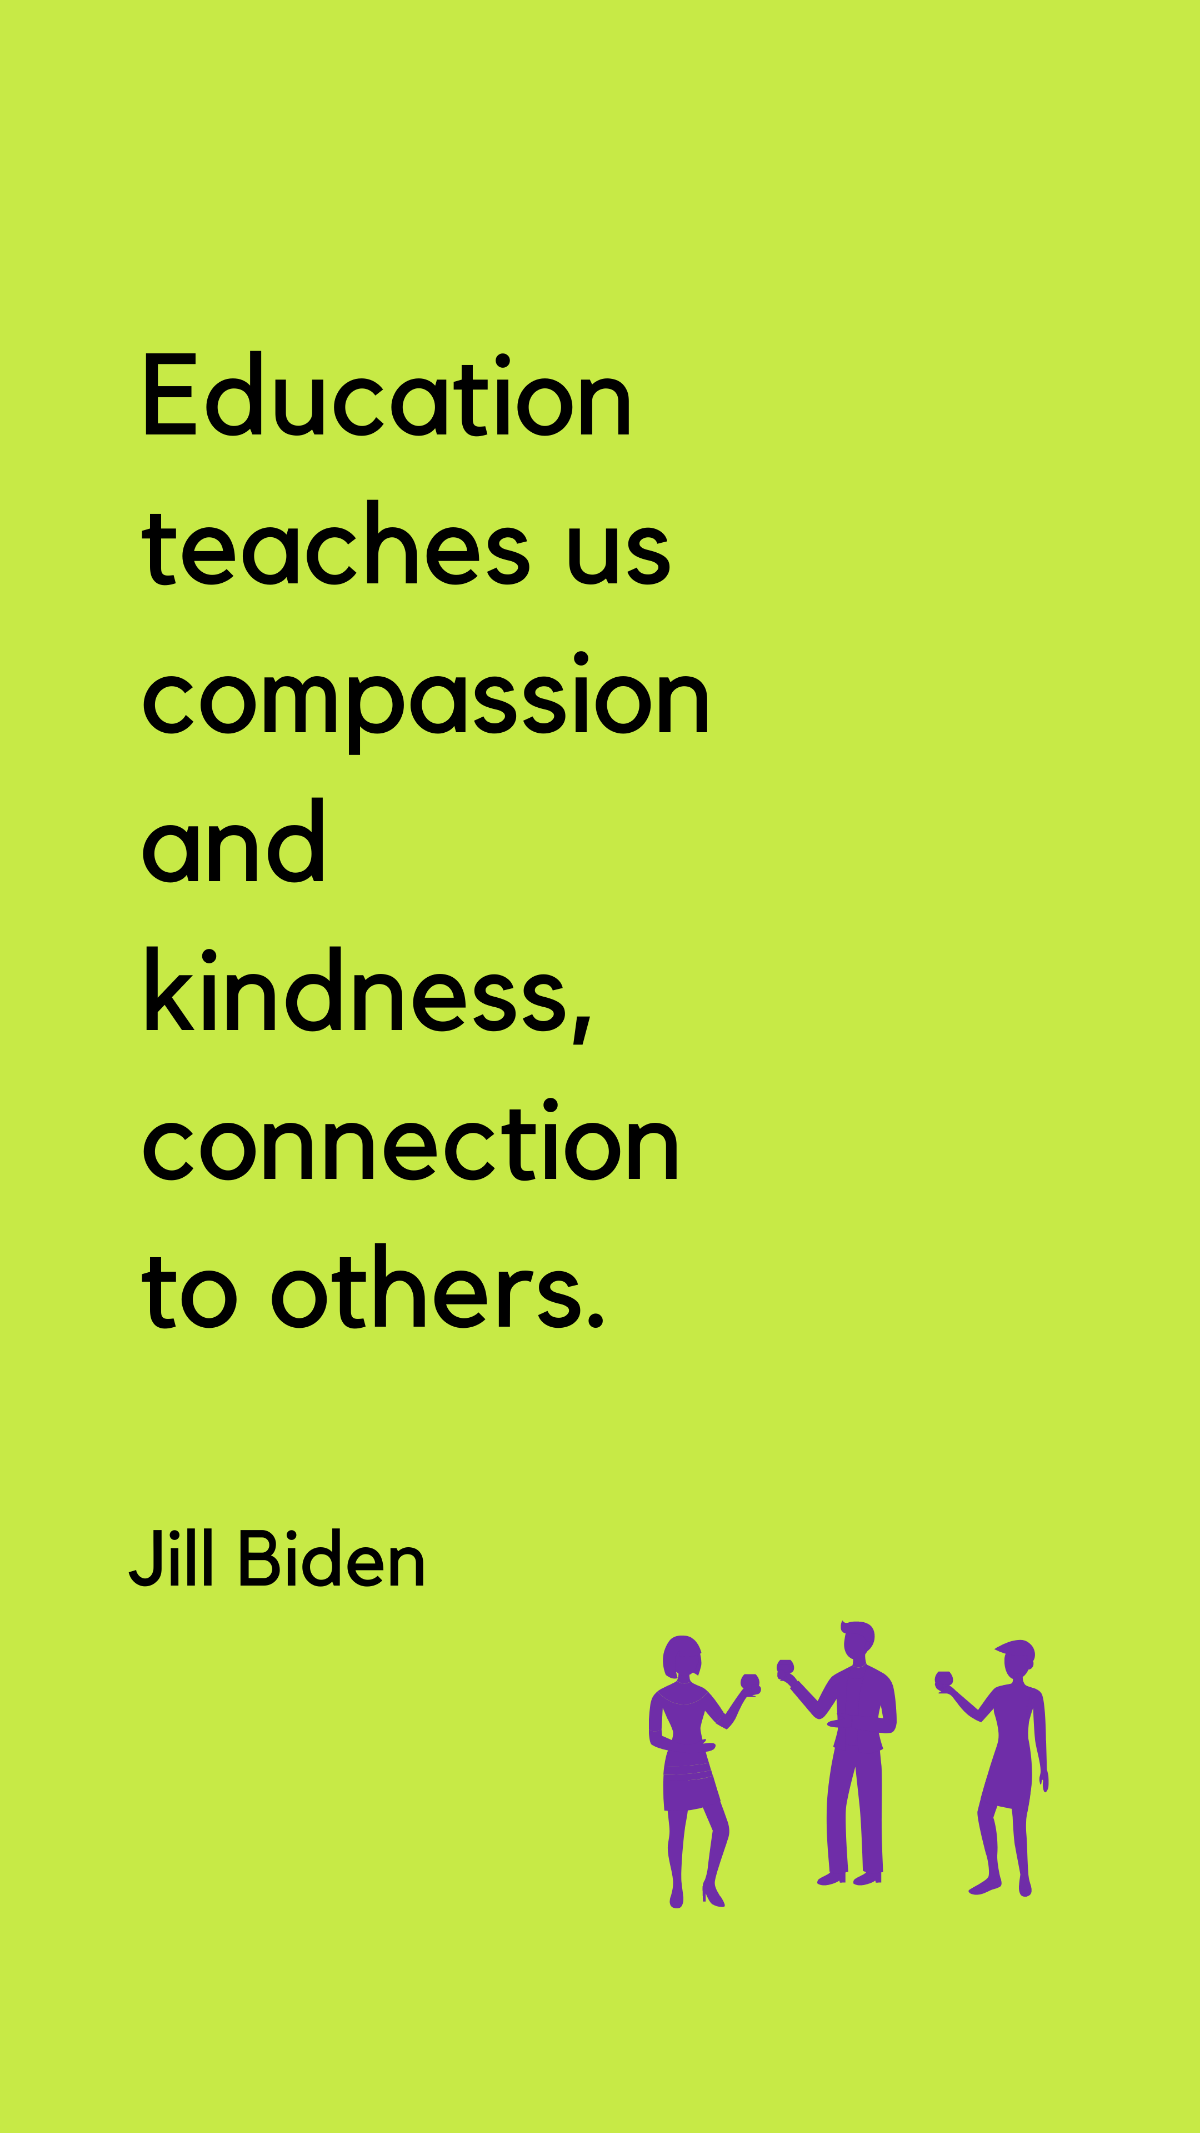 Free Jill Biden - Education teaches us compassion and kindness, connection to others. Template